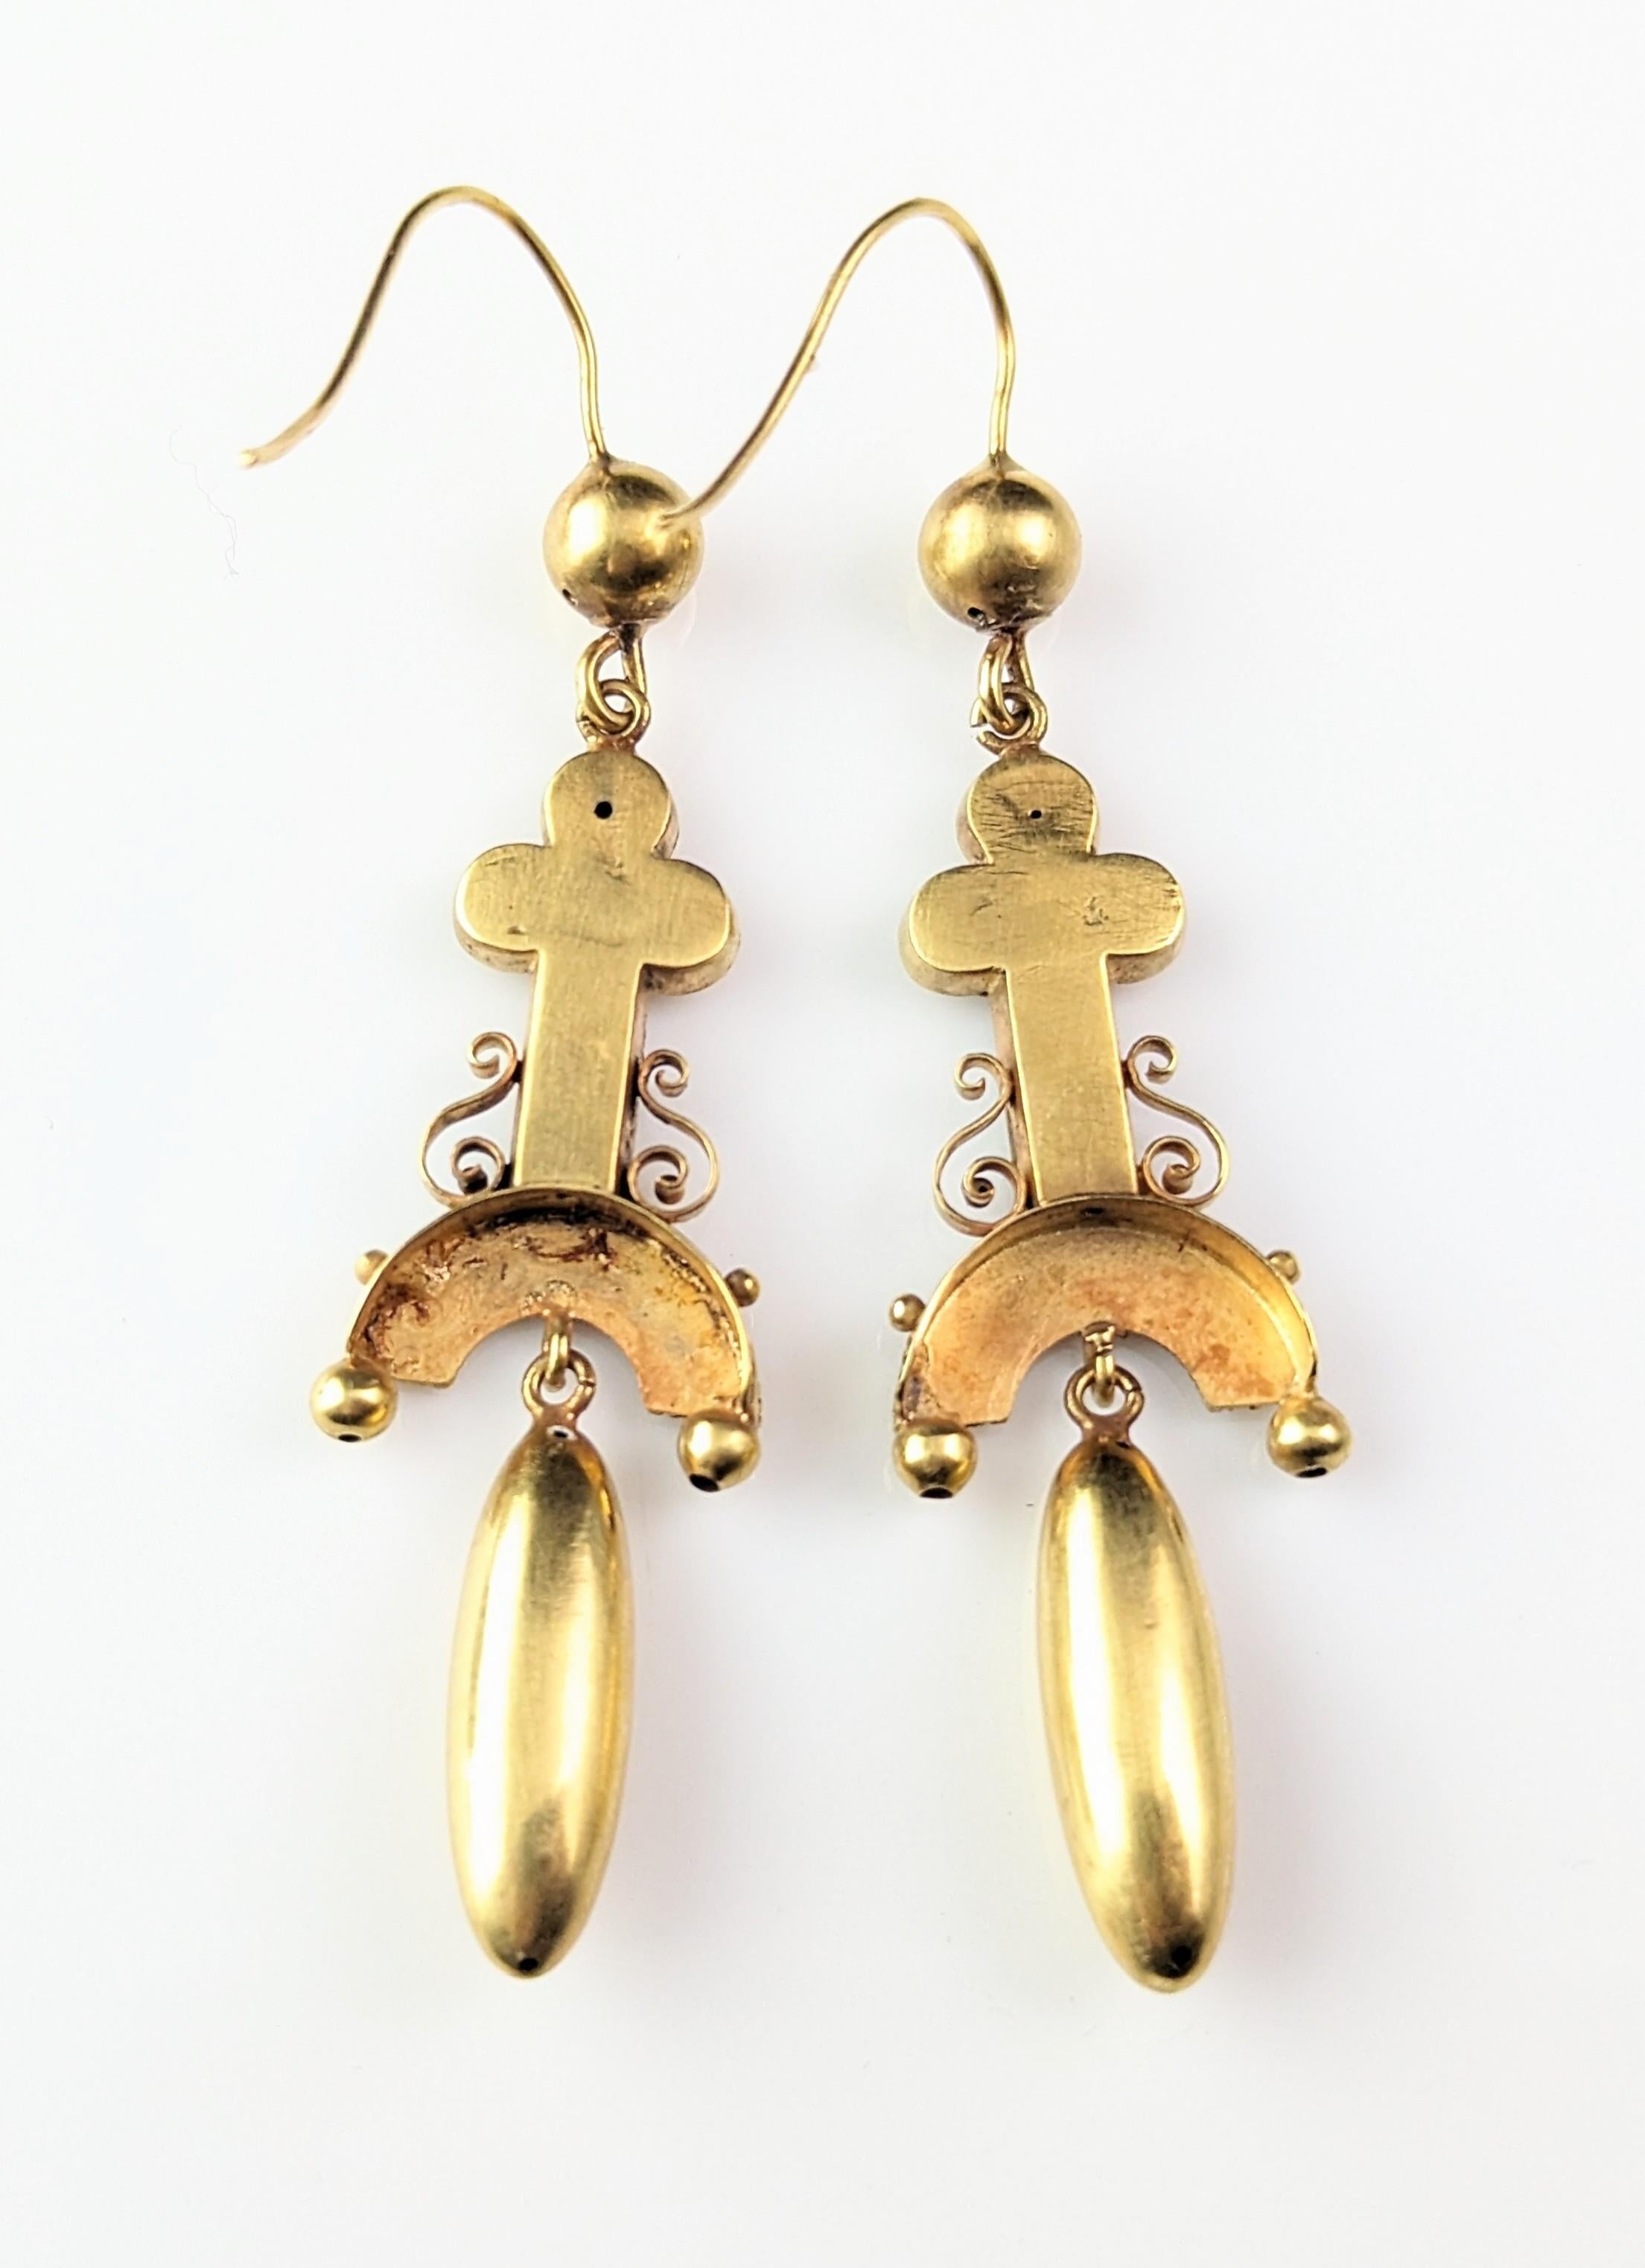 Antique Etruscan revival earrings, 15k yellow gold  For Sale 7